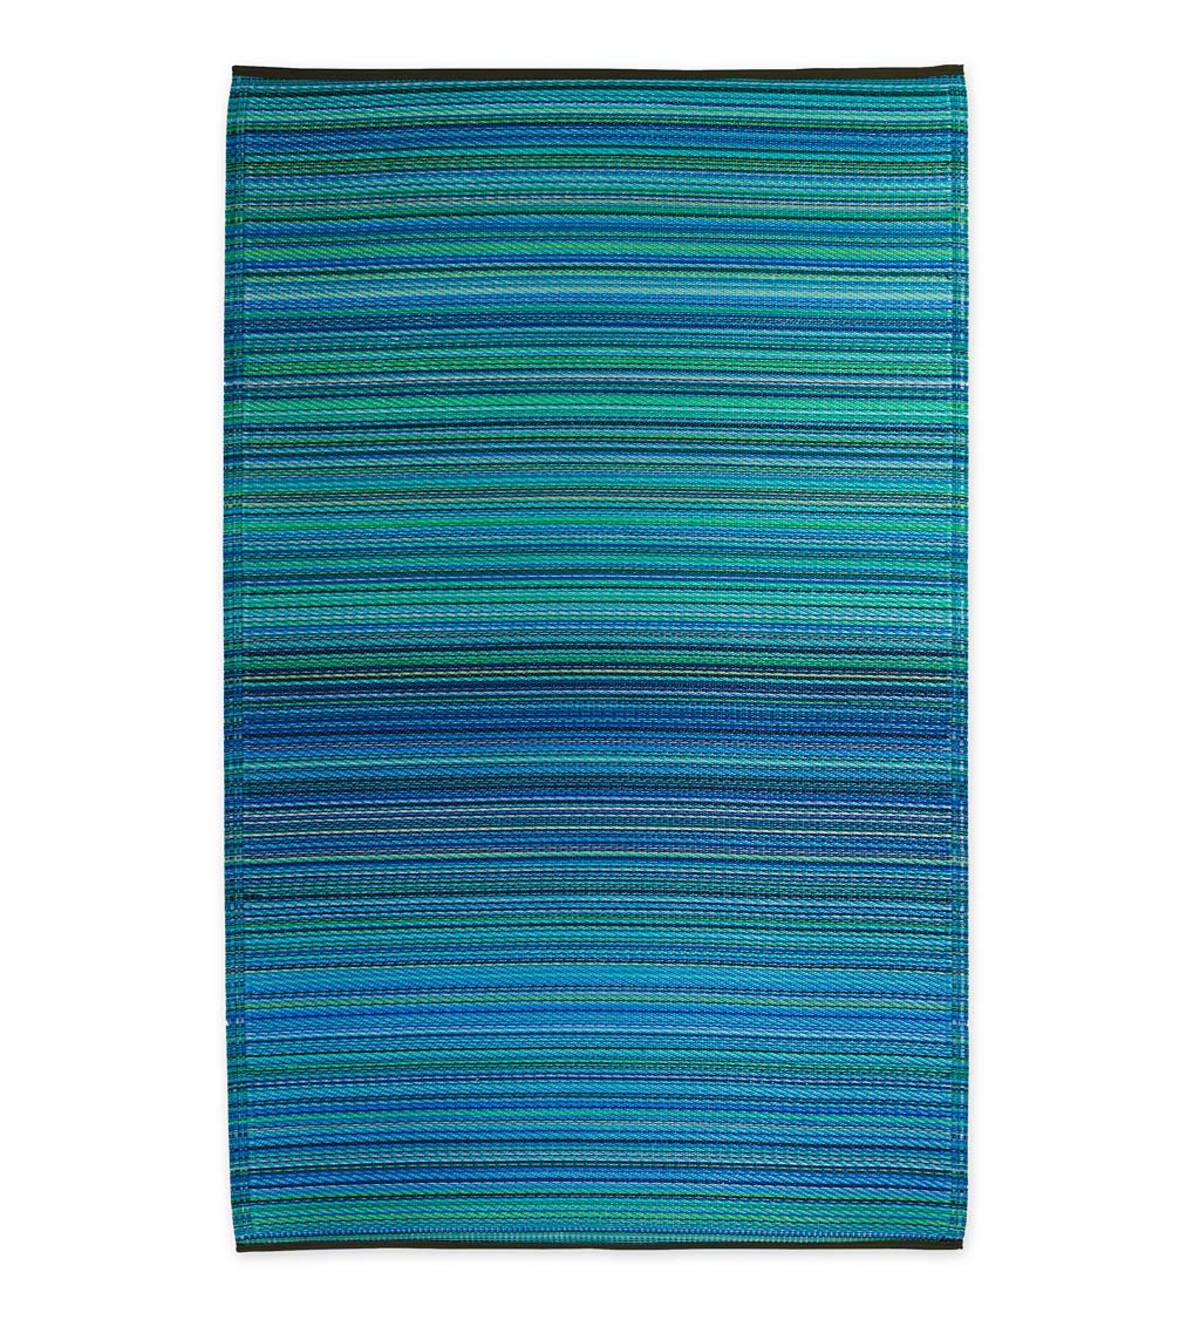 Reversible & Recycled Indoor/Outdoor Rug Cancun Style, 4'x6' - Turquoise